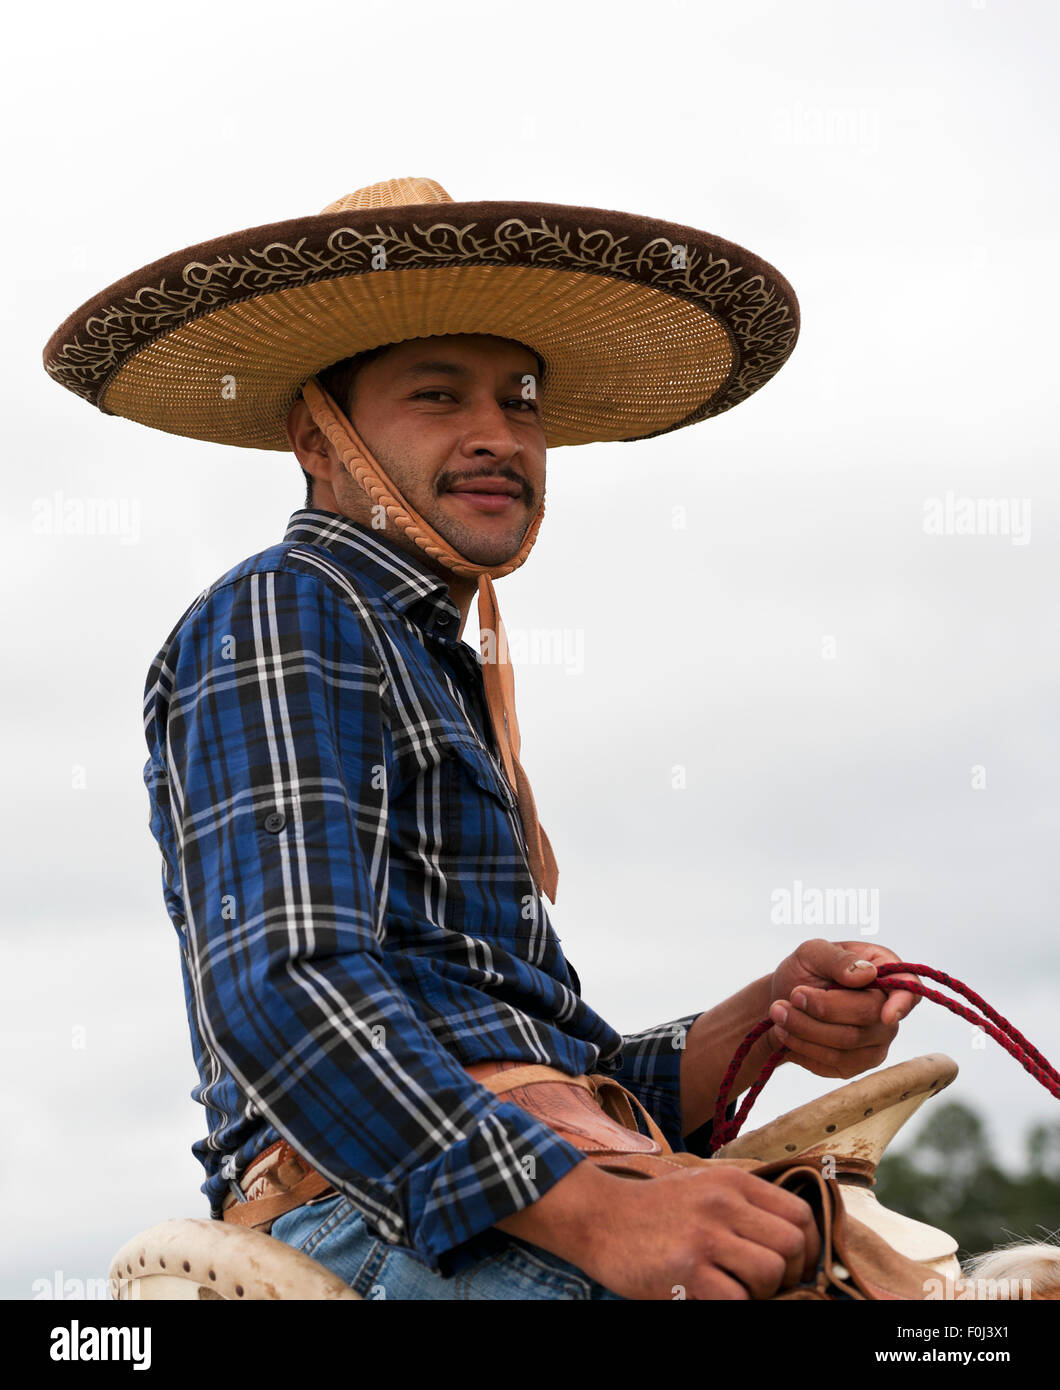 Azteca breed Mexican dancing horse and rider Stock Photo